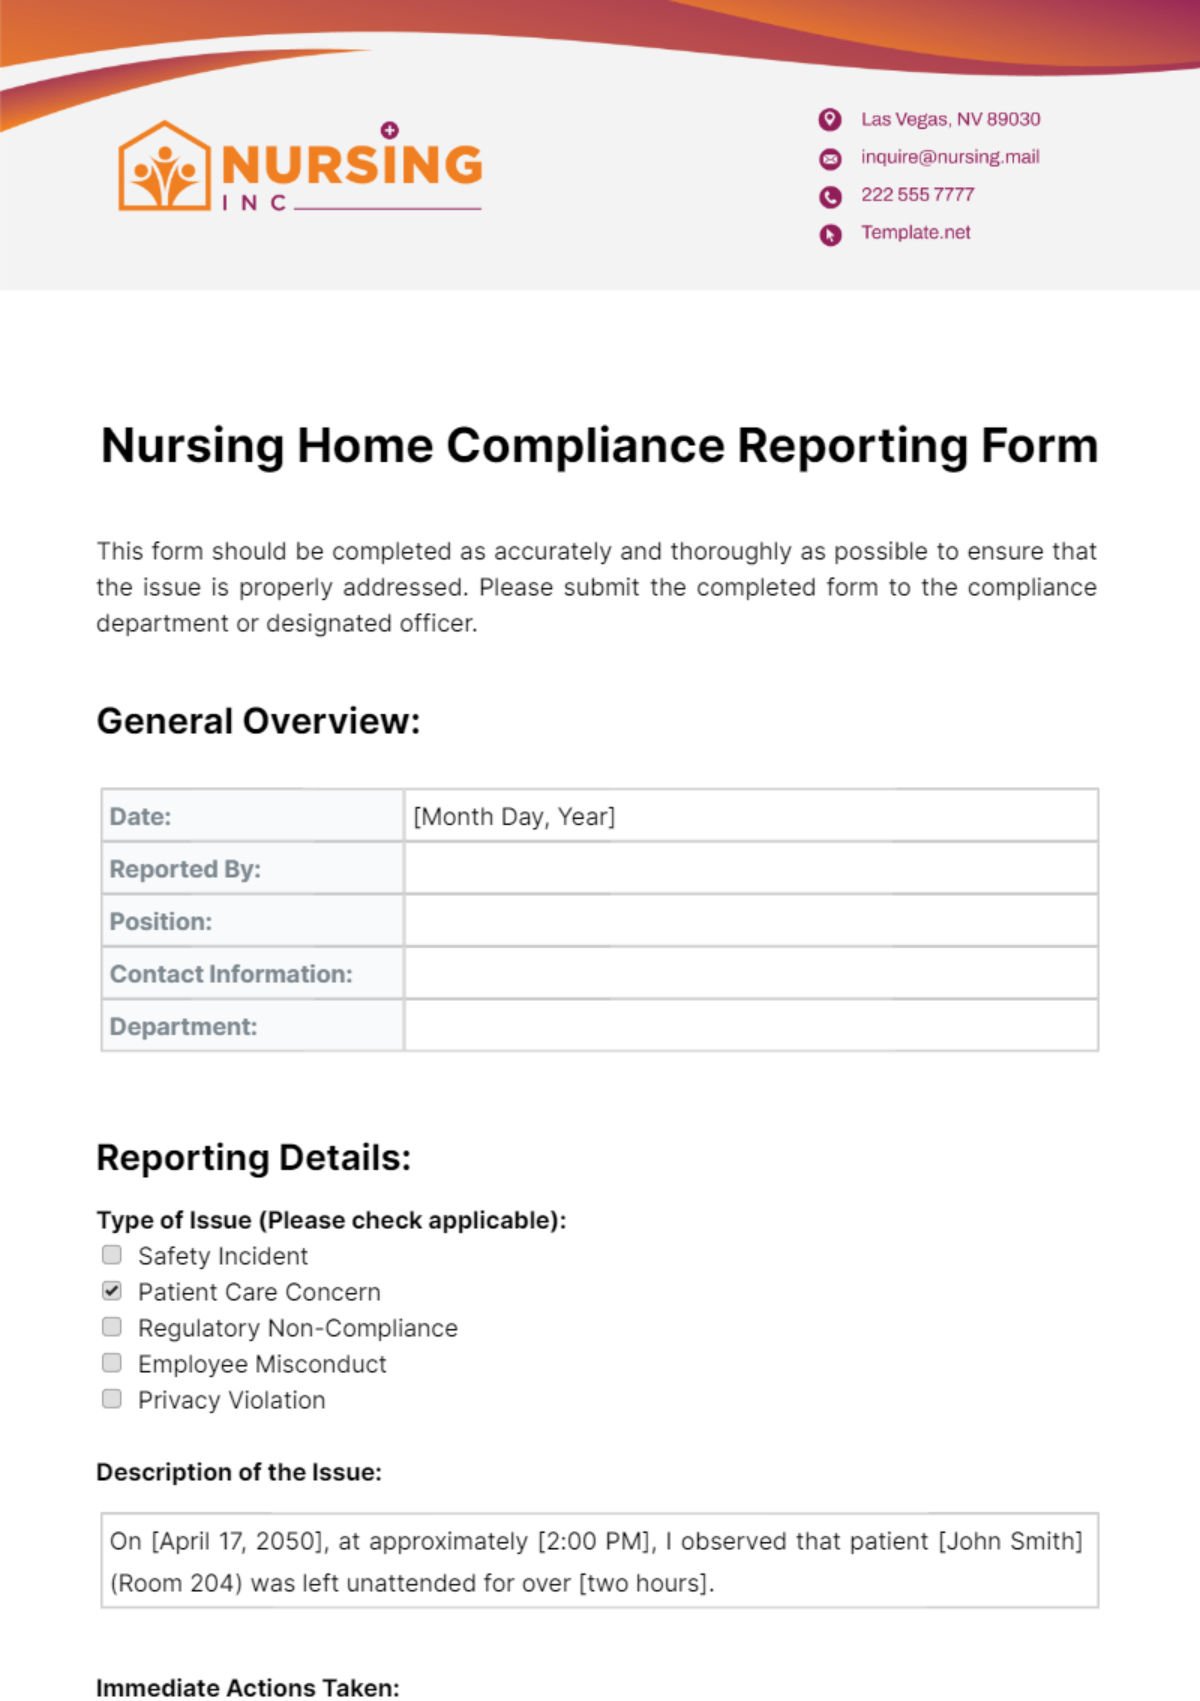 Free Nursing Home Compliance Reporting Form Template